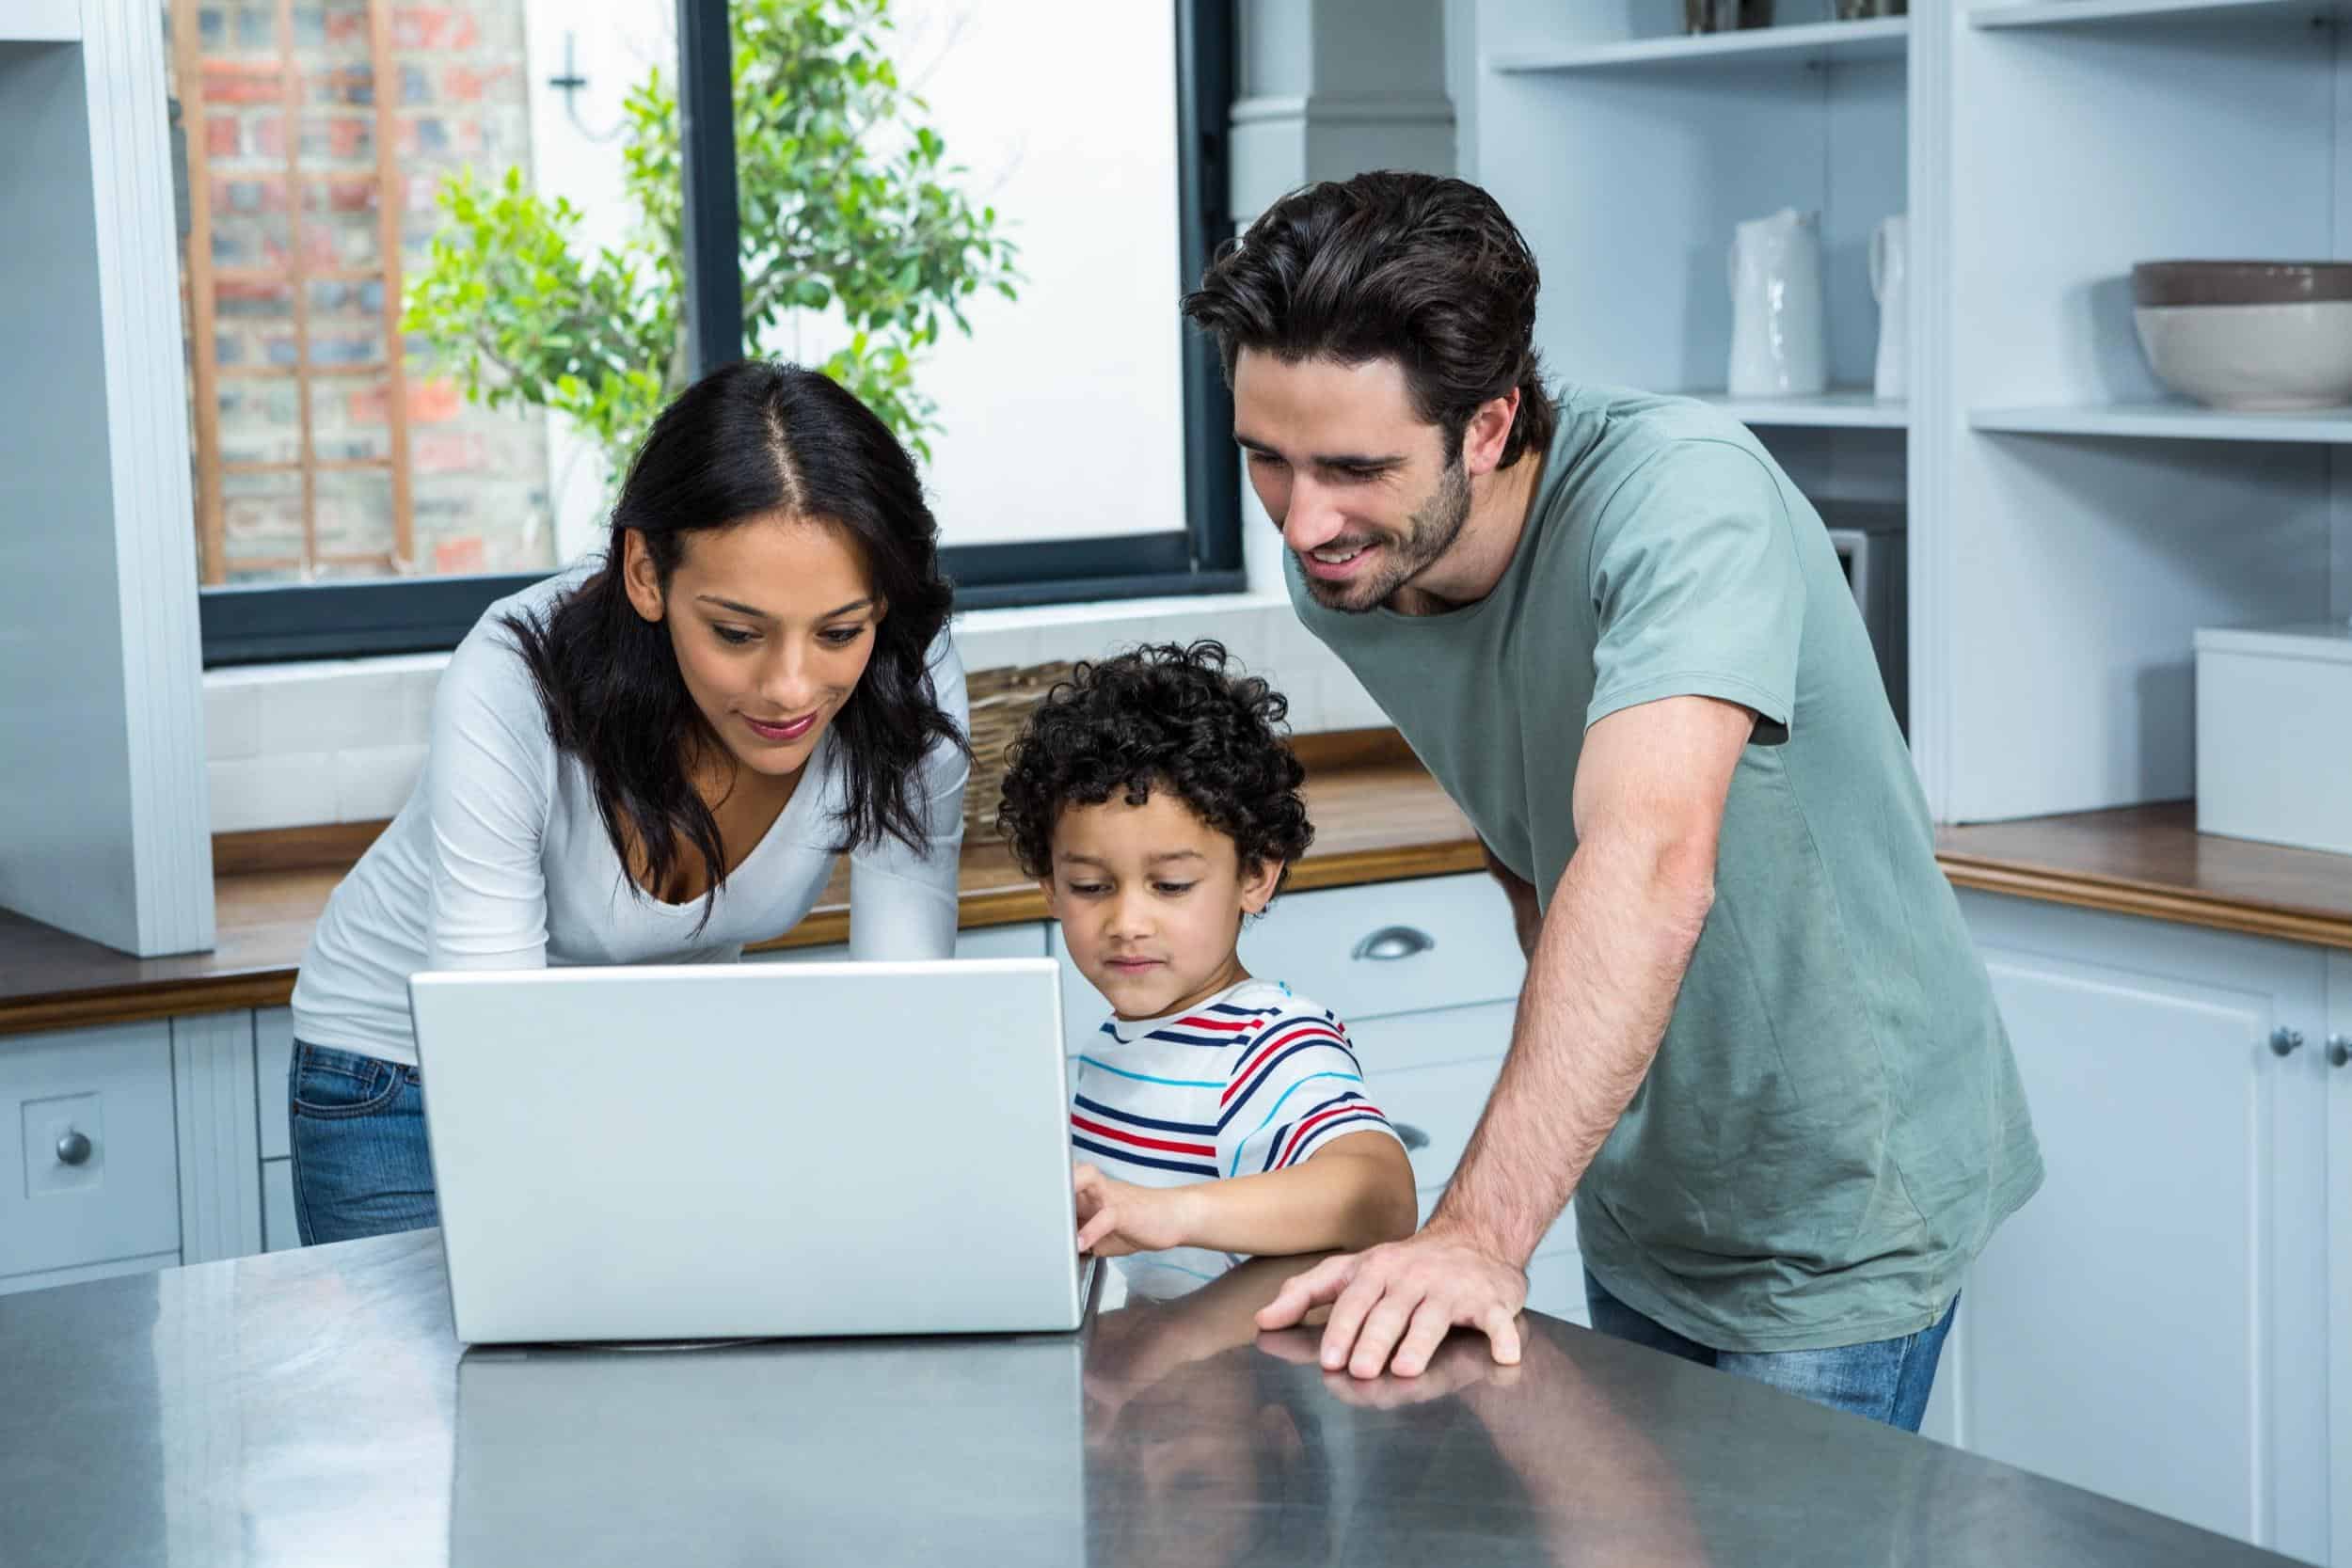 Parents looking at a computer with child.